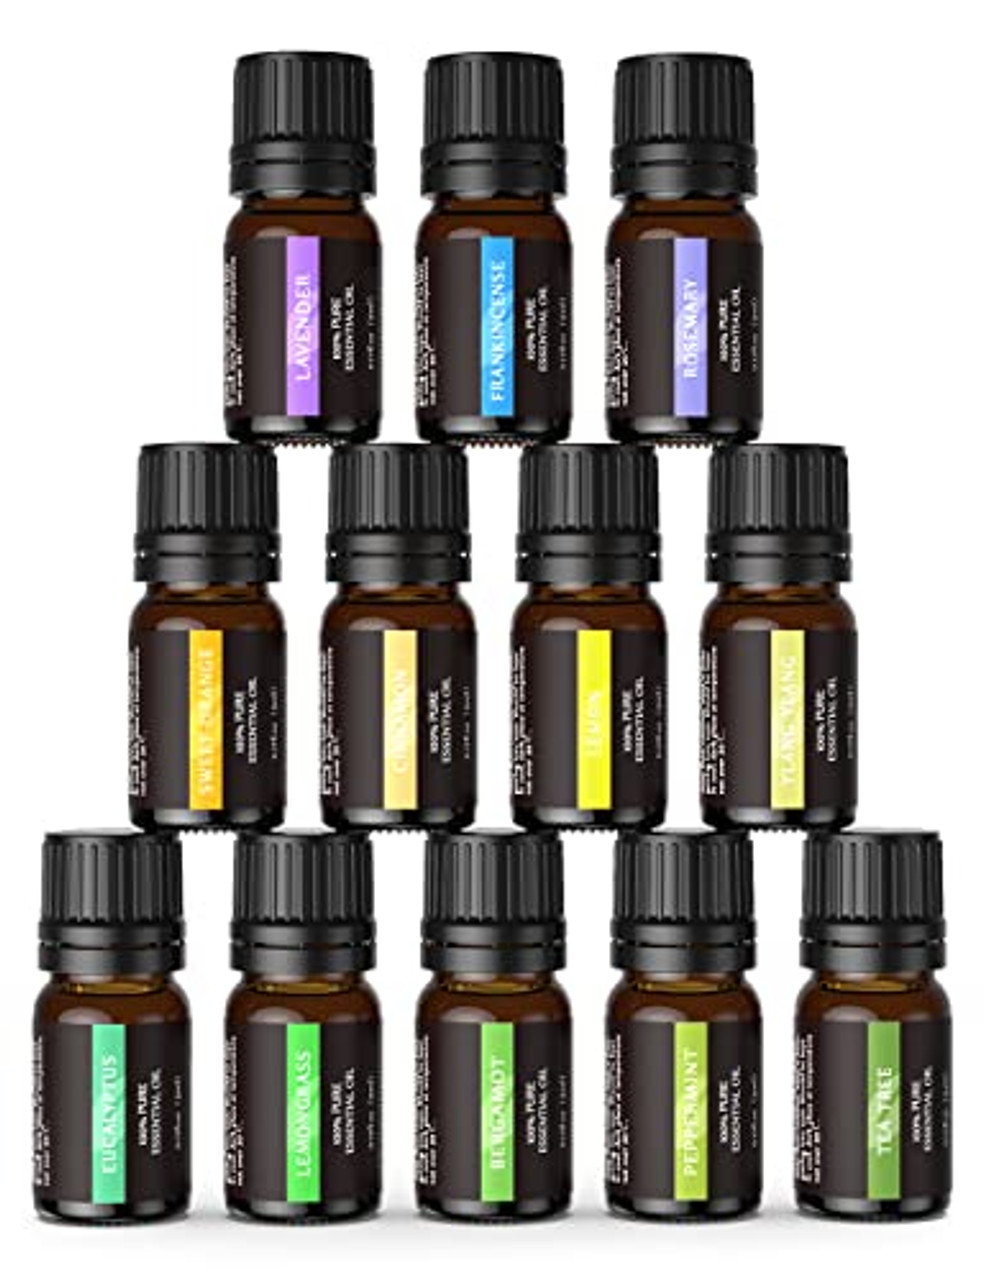 AOSNO Essential Oil Top 12*5ml Essential Oils for Diffusers for